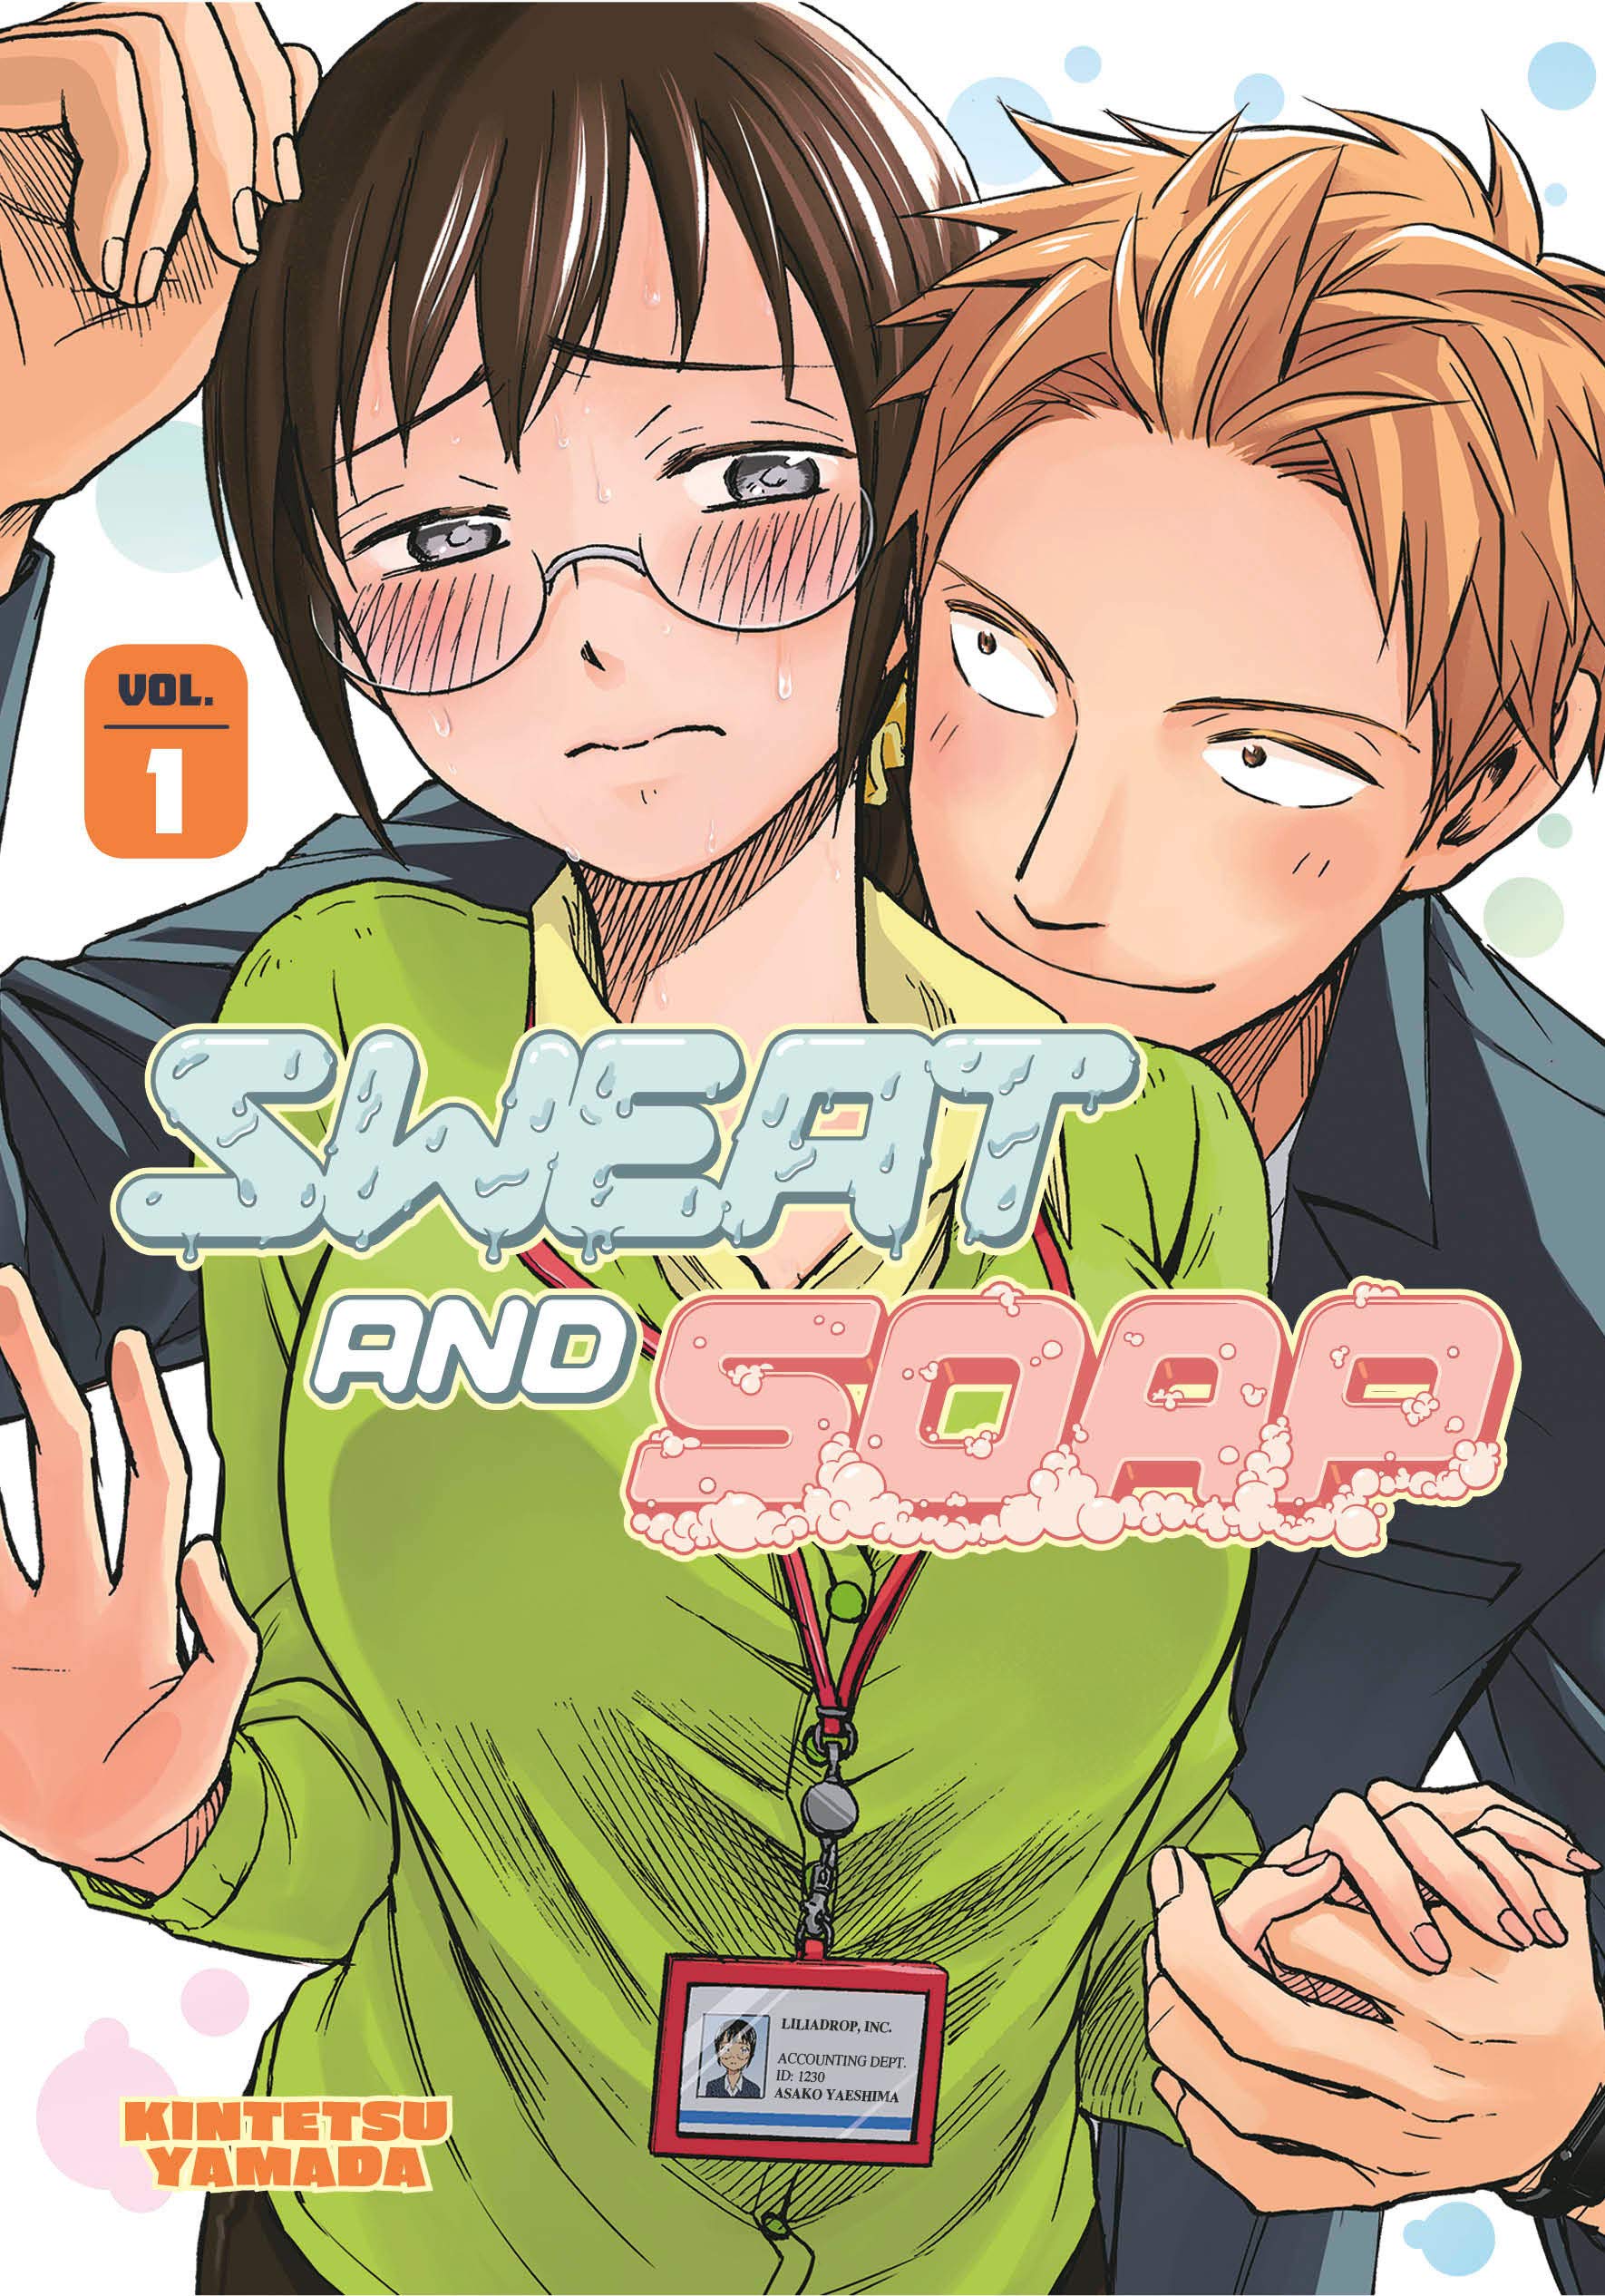 The cover of the Volume 01 of the Kodansha Comics English language release of Sweat and Soap, as illustrated by Kintetsu Yamada.